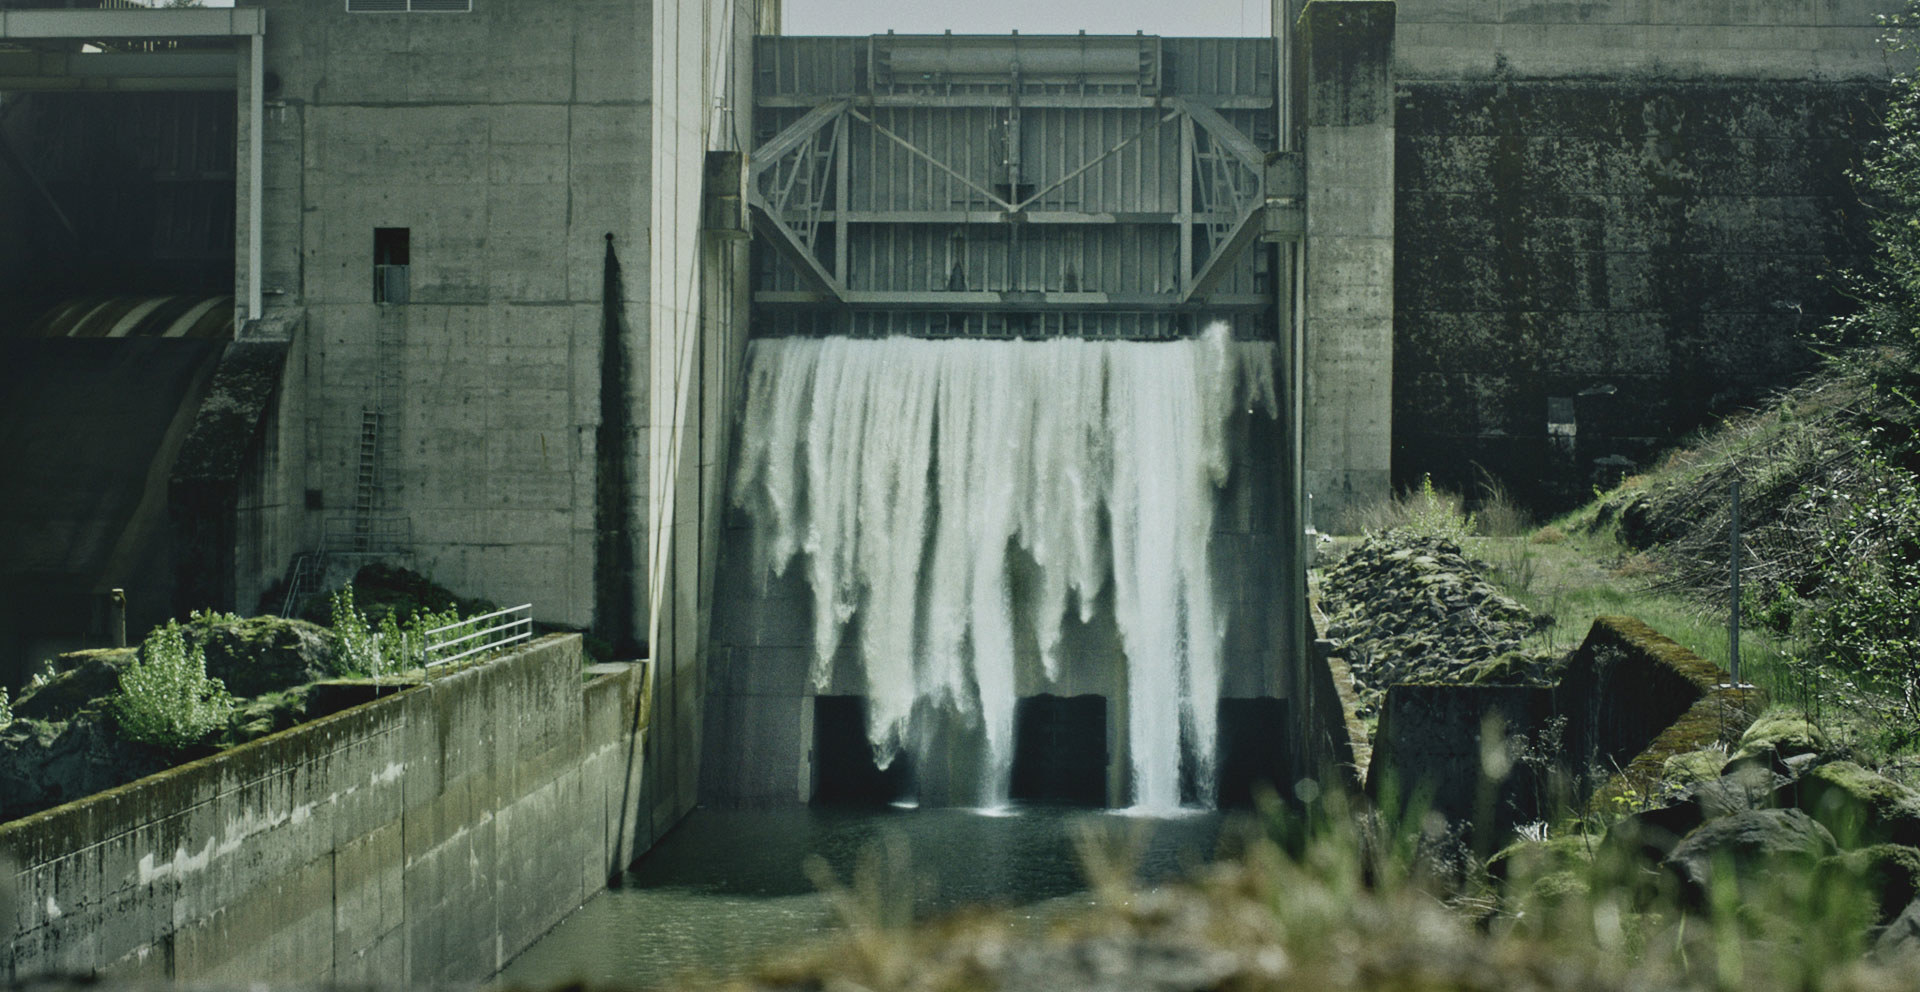 Water is released from holding in a hydroelectric dam.